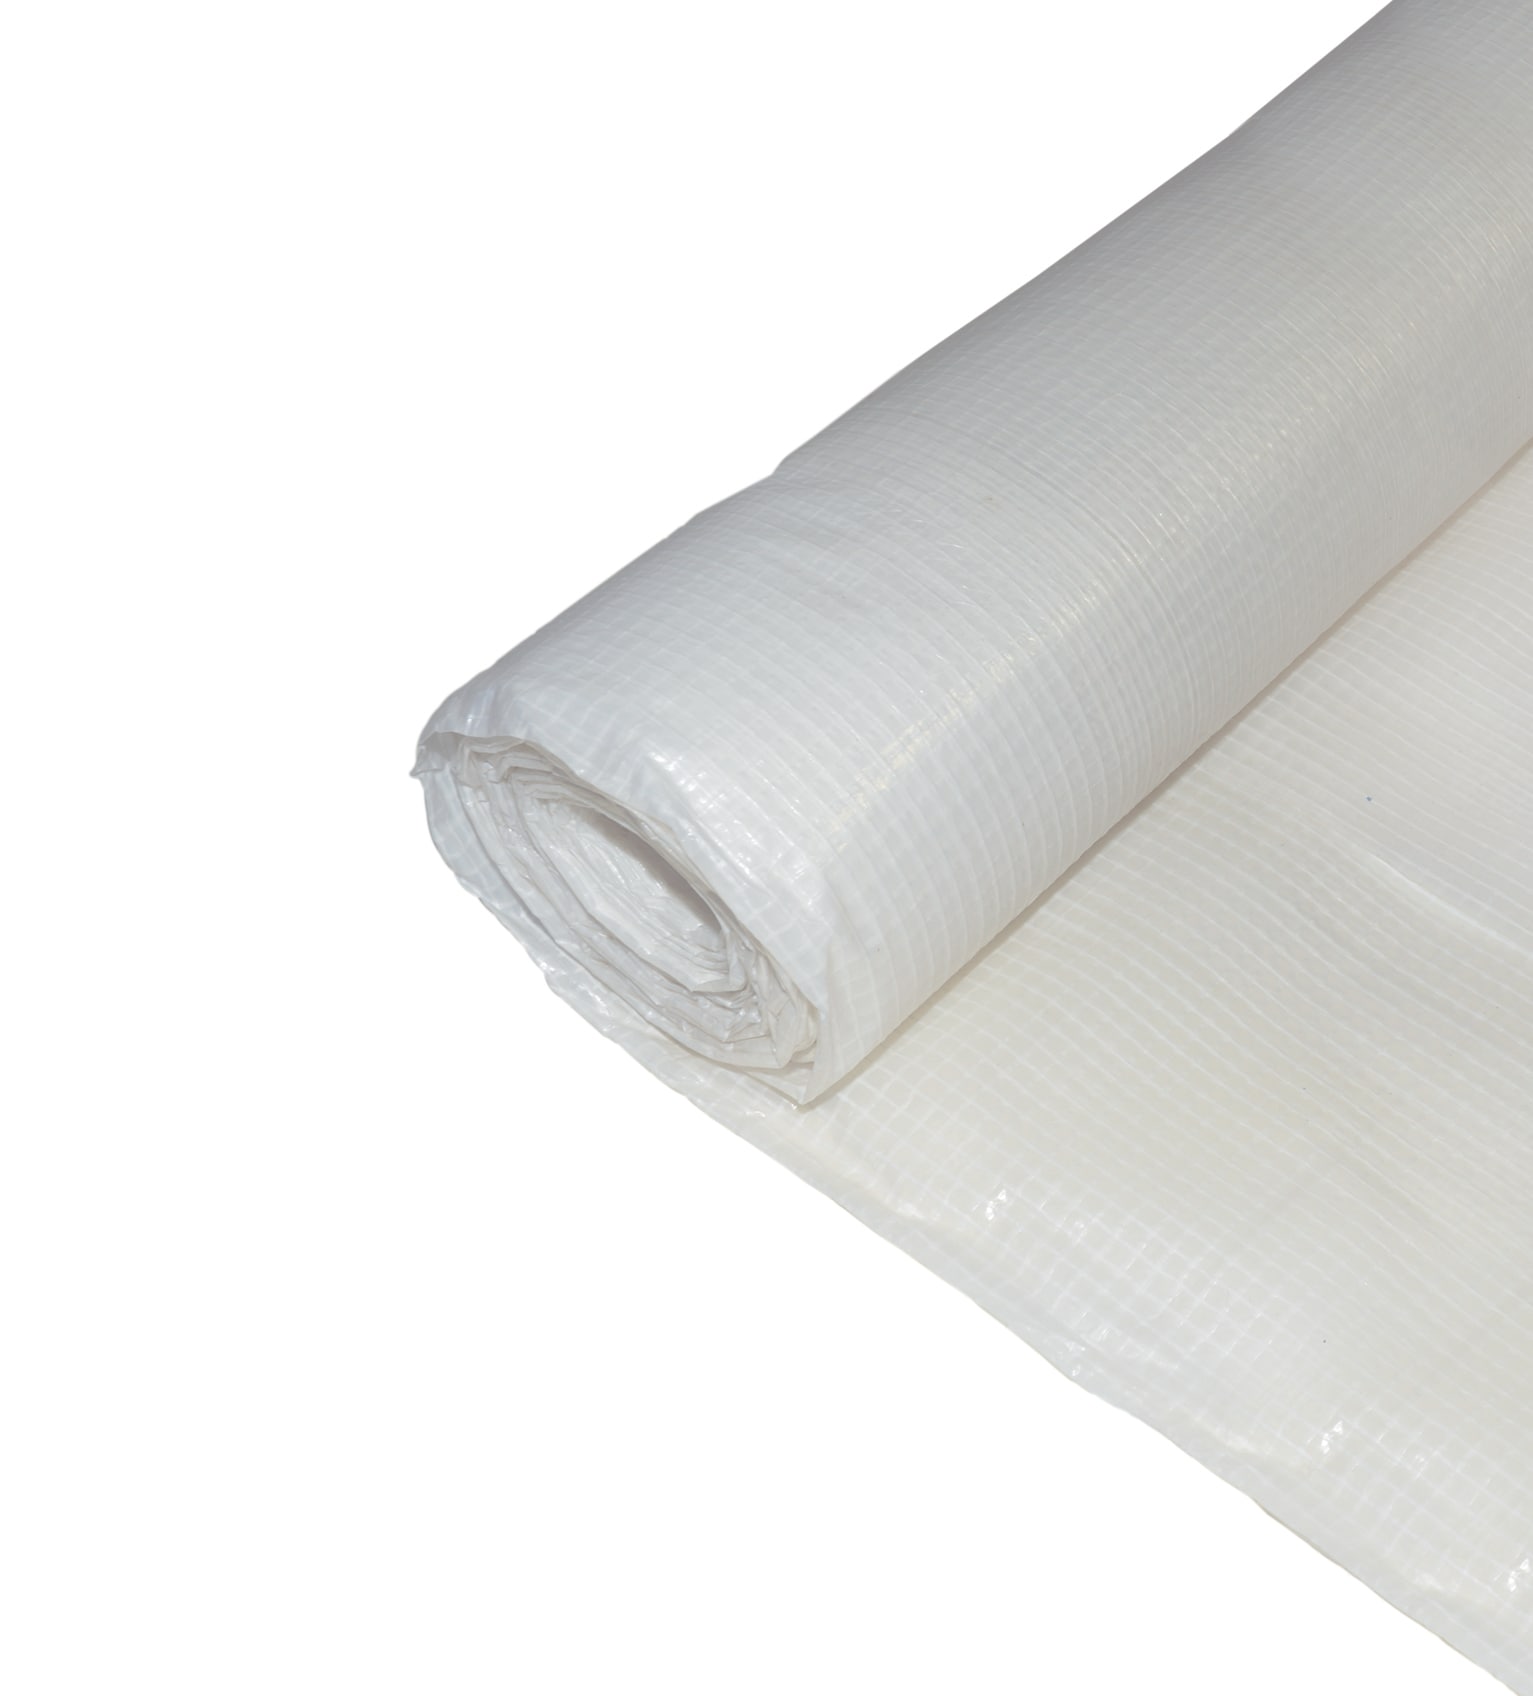 Buy 6 Mil Clear Plastic Sheeting - Visqueen String Reinforced - 40x100